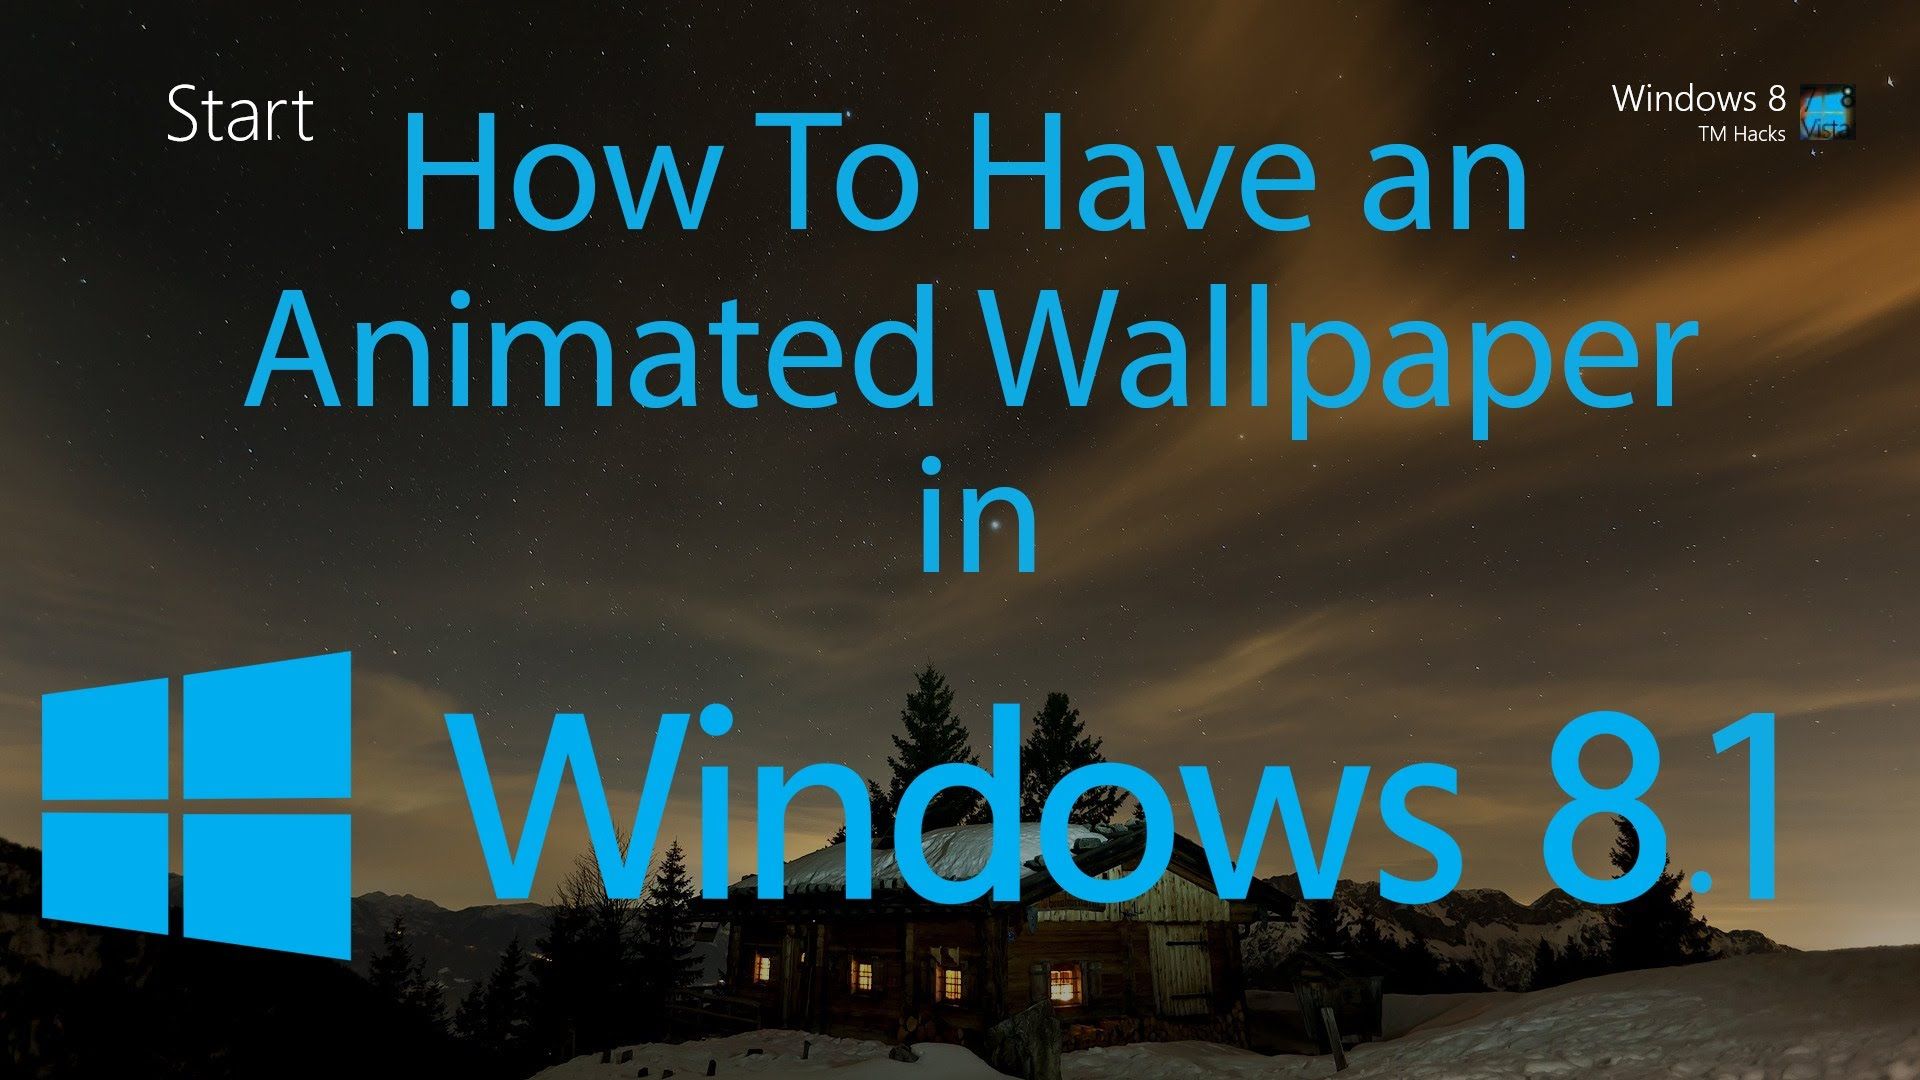 How To Have an Animated Wallpaper in Windows 8.1 - YouTube